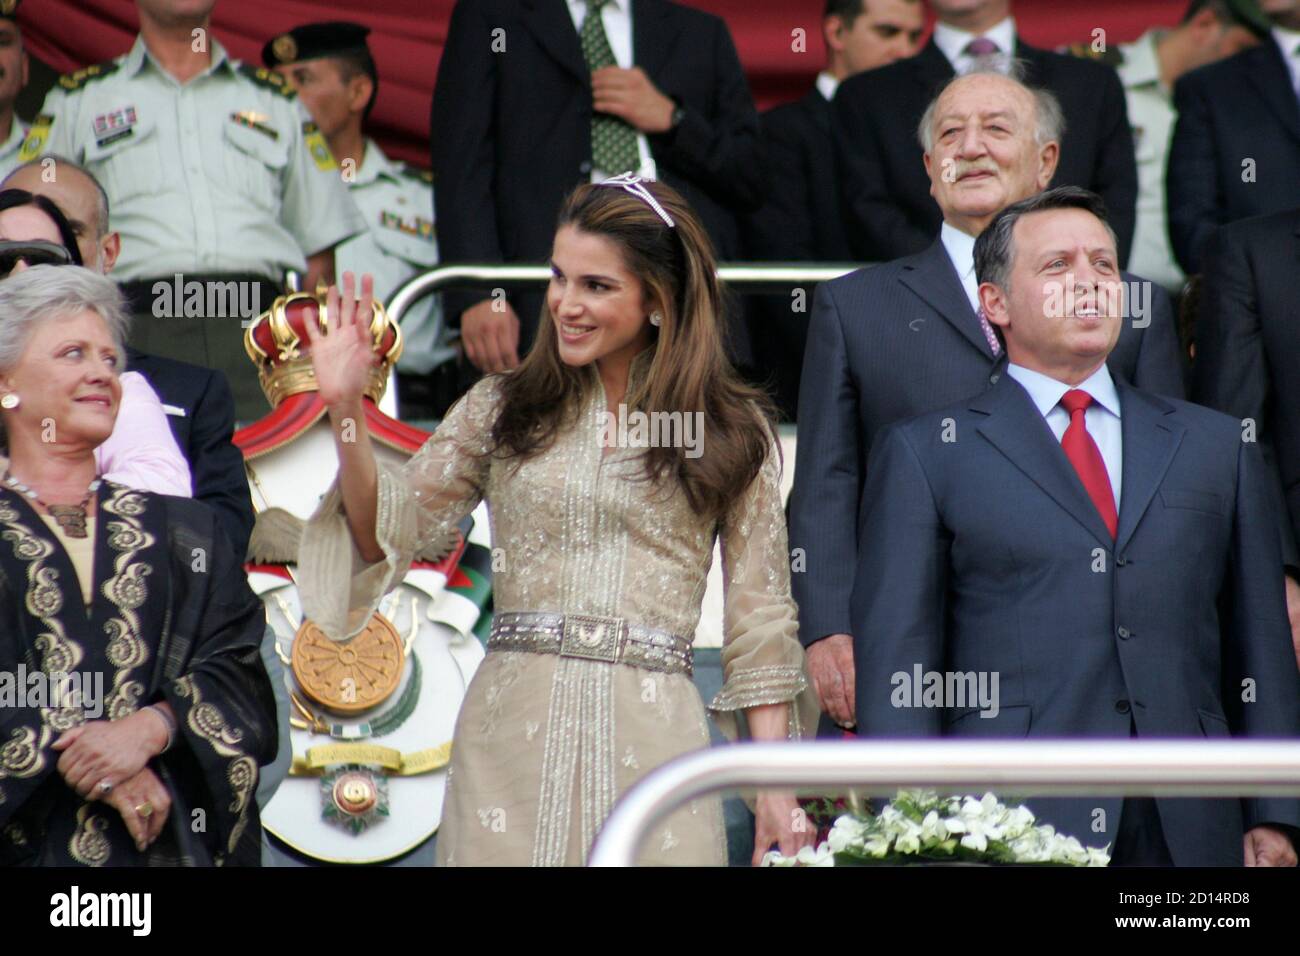 Jordan's King Abdullah (R), his wife Queen Rania (C) and his mother  Princess Muna attend official celebrations of the 10th anniversary of  Abdullah's accession to the throne in Amman June 9, 2009.